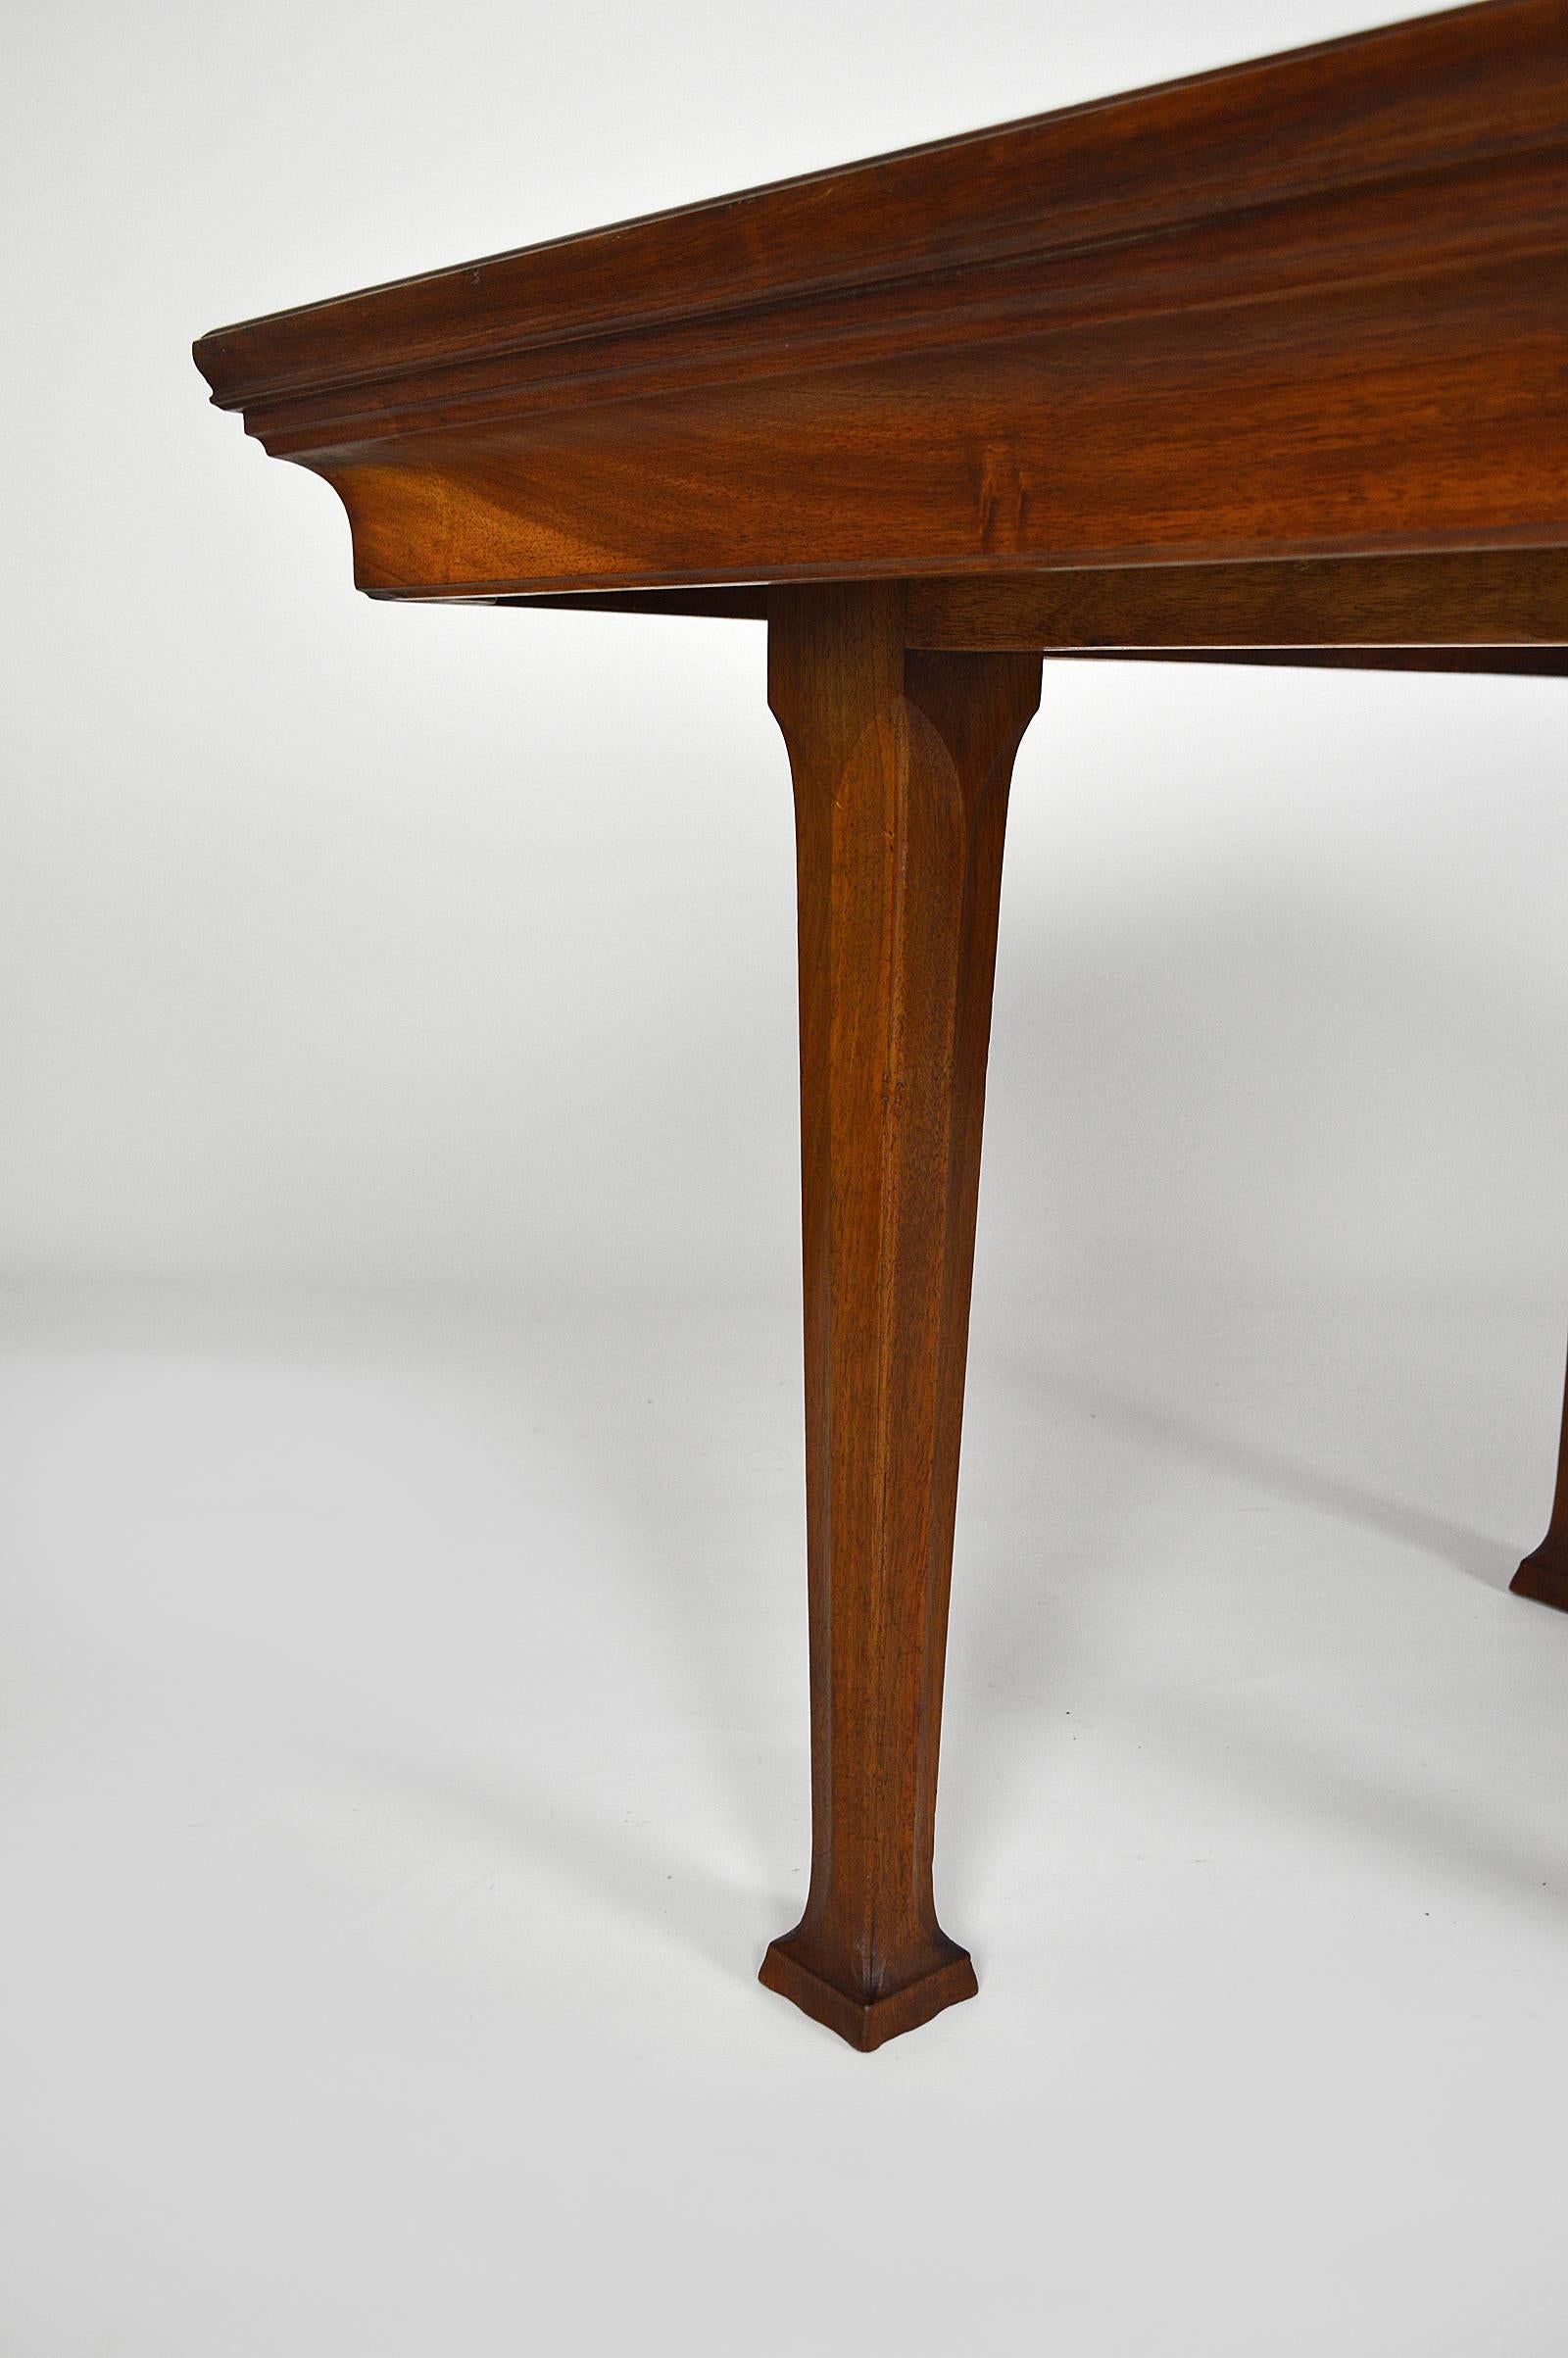 Art Nouveau Carved Walnut Dining Table, circa 1905, Attributed to Georges Nowak For Sale 2